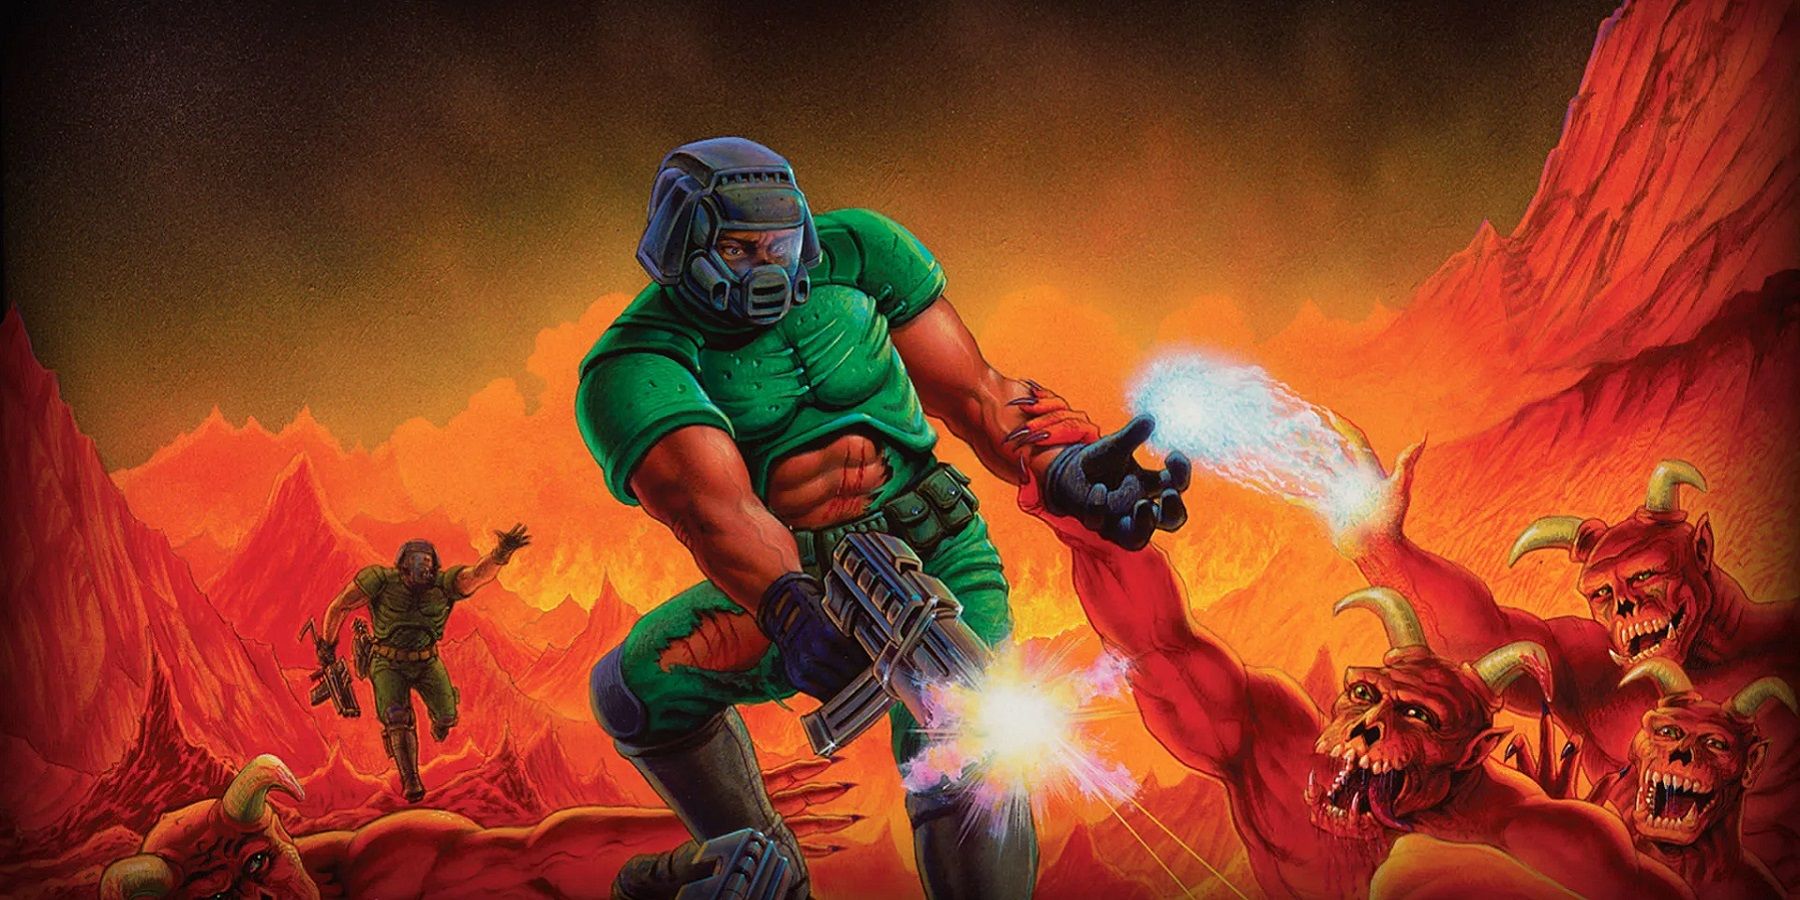 The classic Doom image showing the Doomguy shooting at demons.